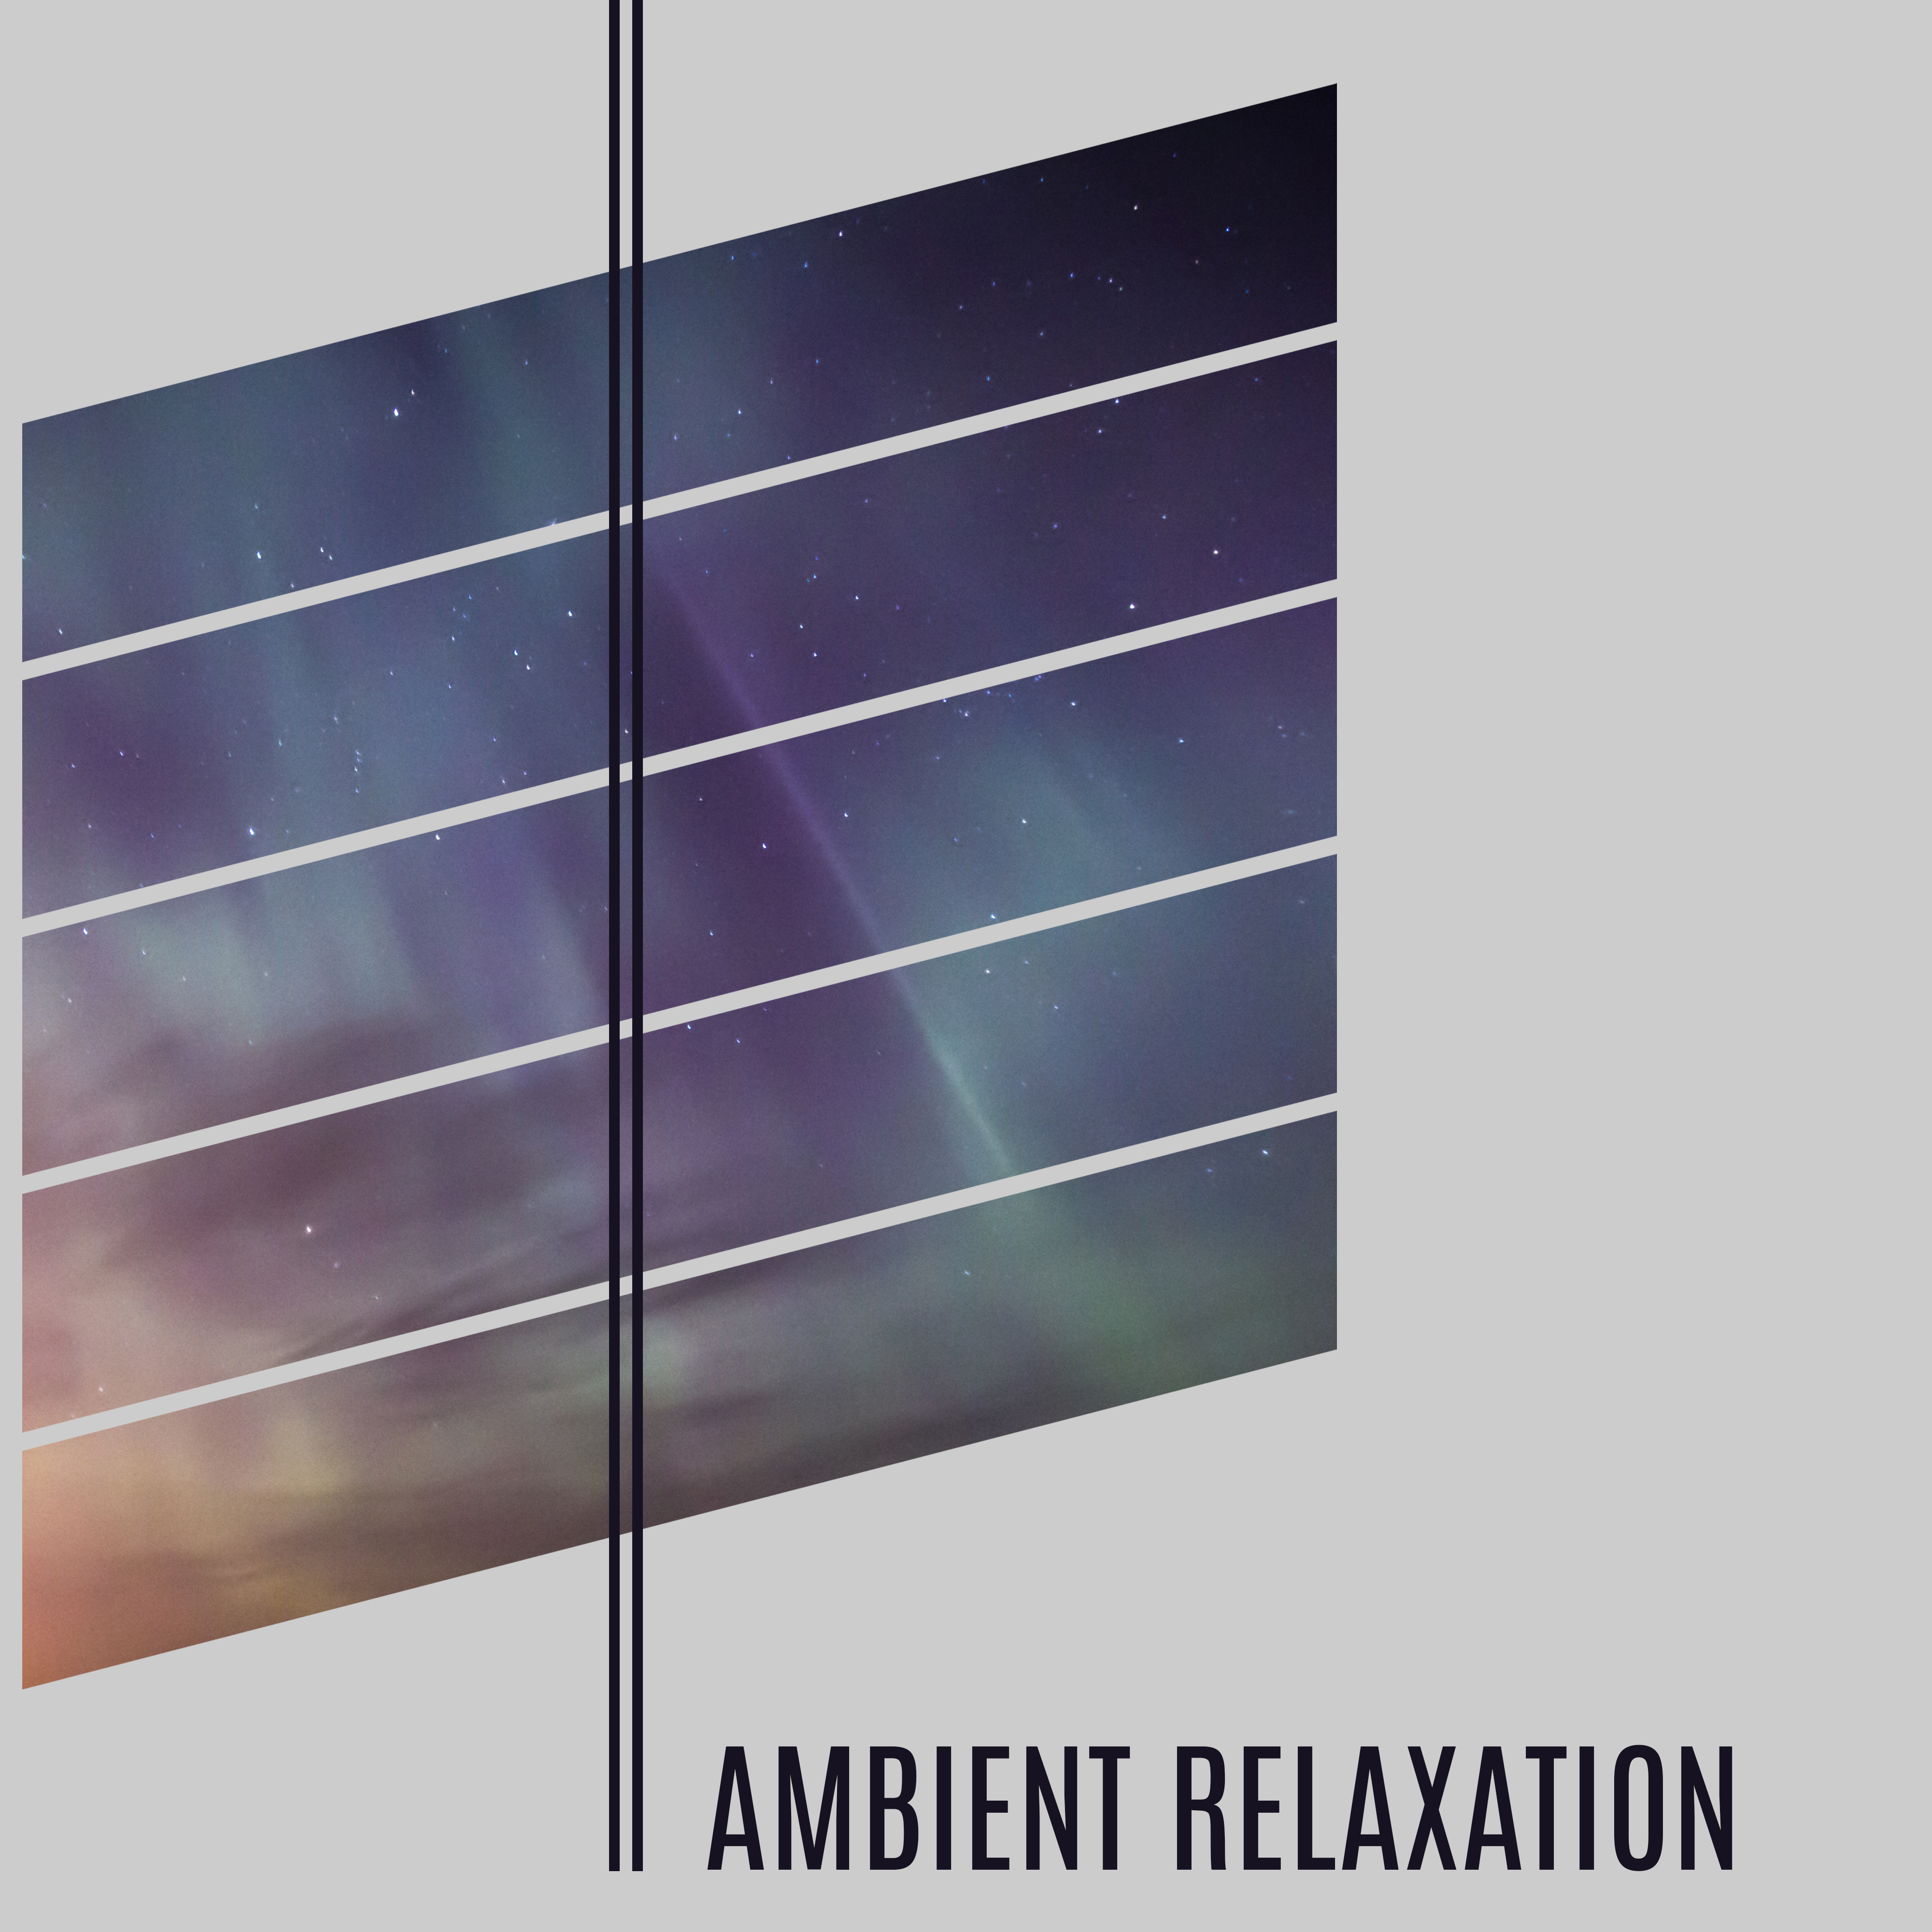 Ambient Relaxation  Relaxing Music, Pure Nature Sounds, Relief Stress  Relax, Helpful for Meditation and Massage Treatments